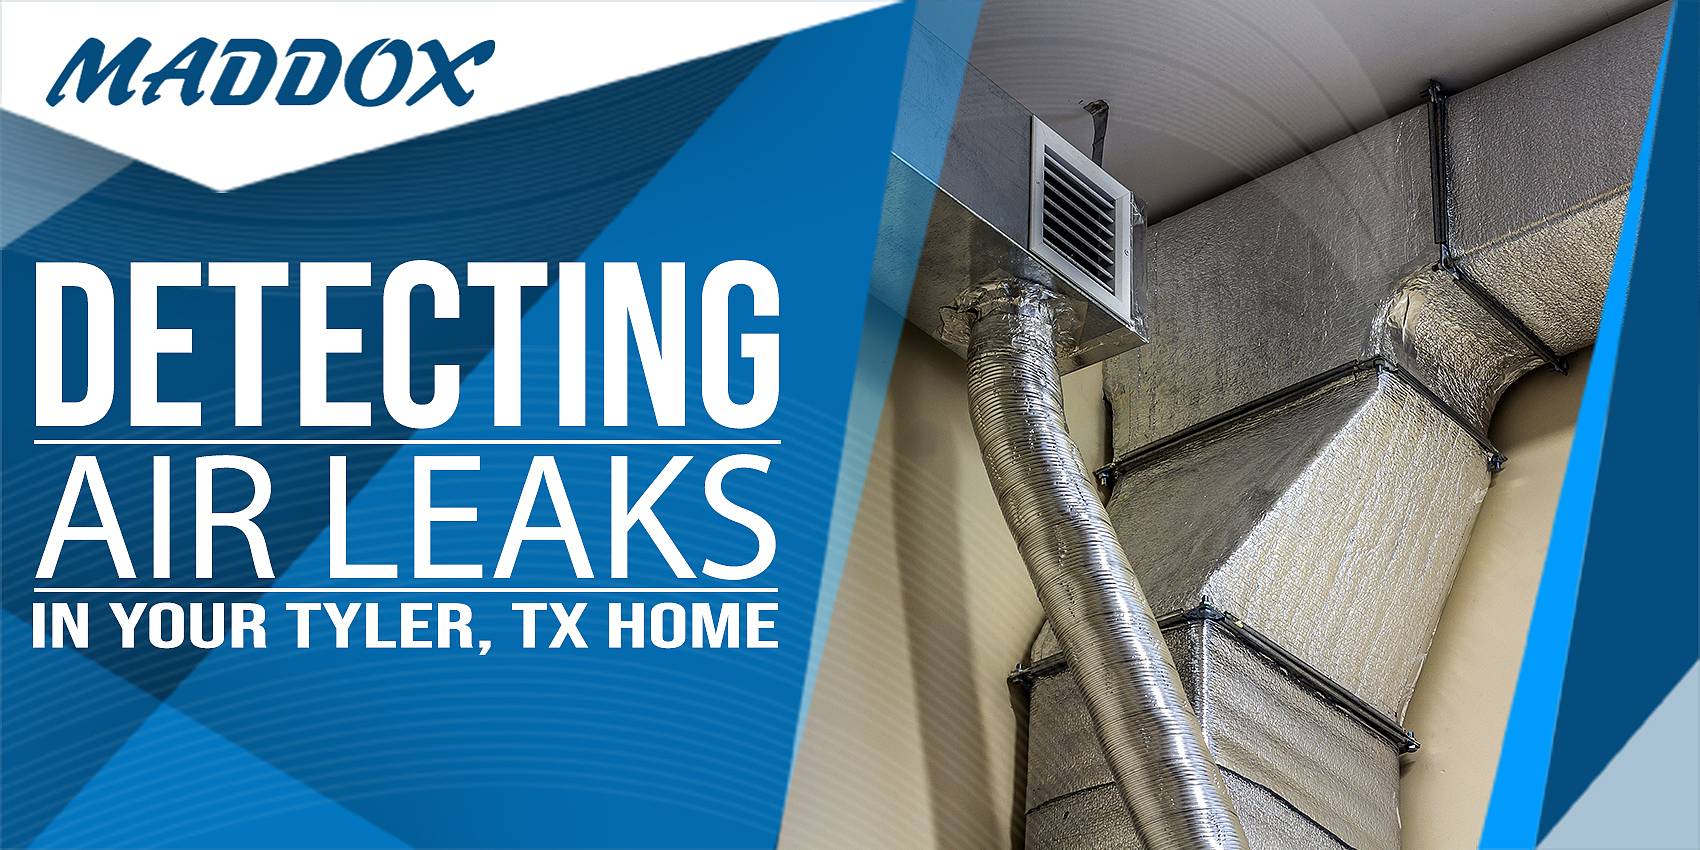 Detecting Air Leaks in your Tyler, TX Home